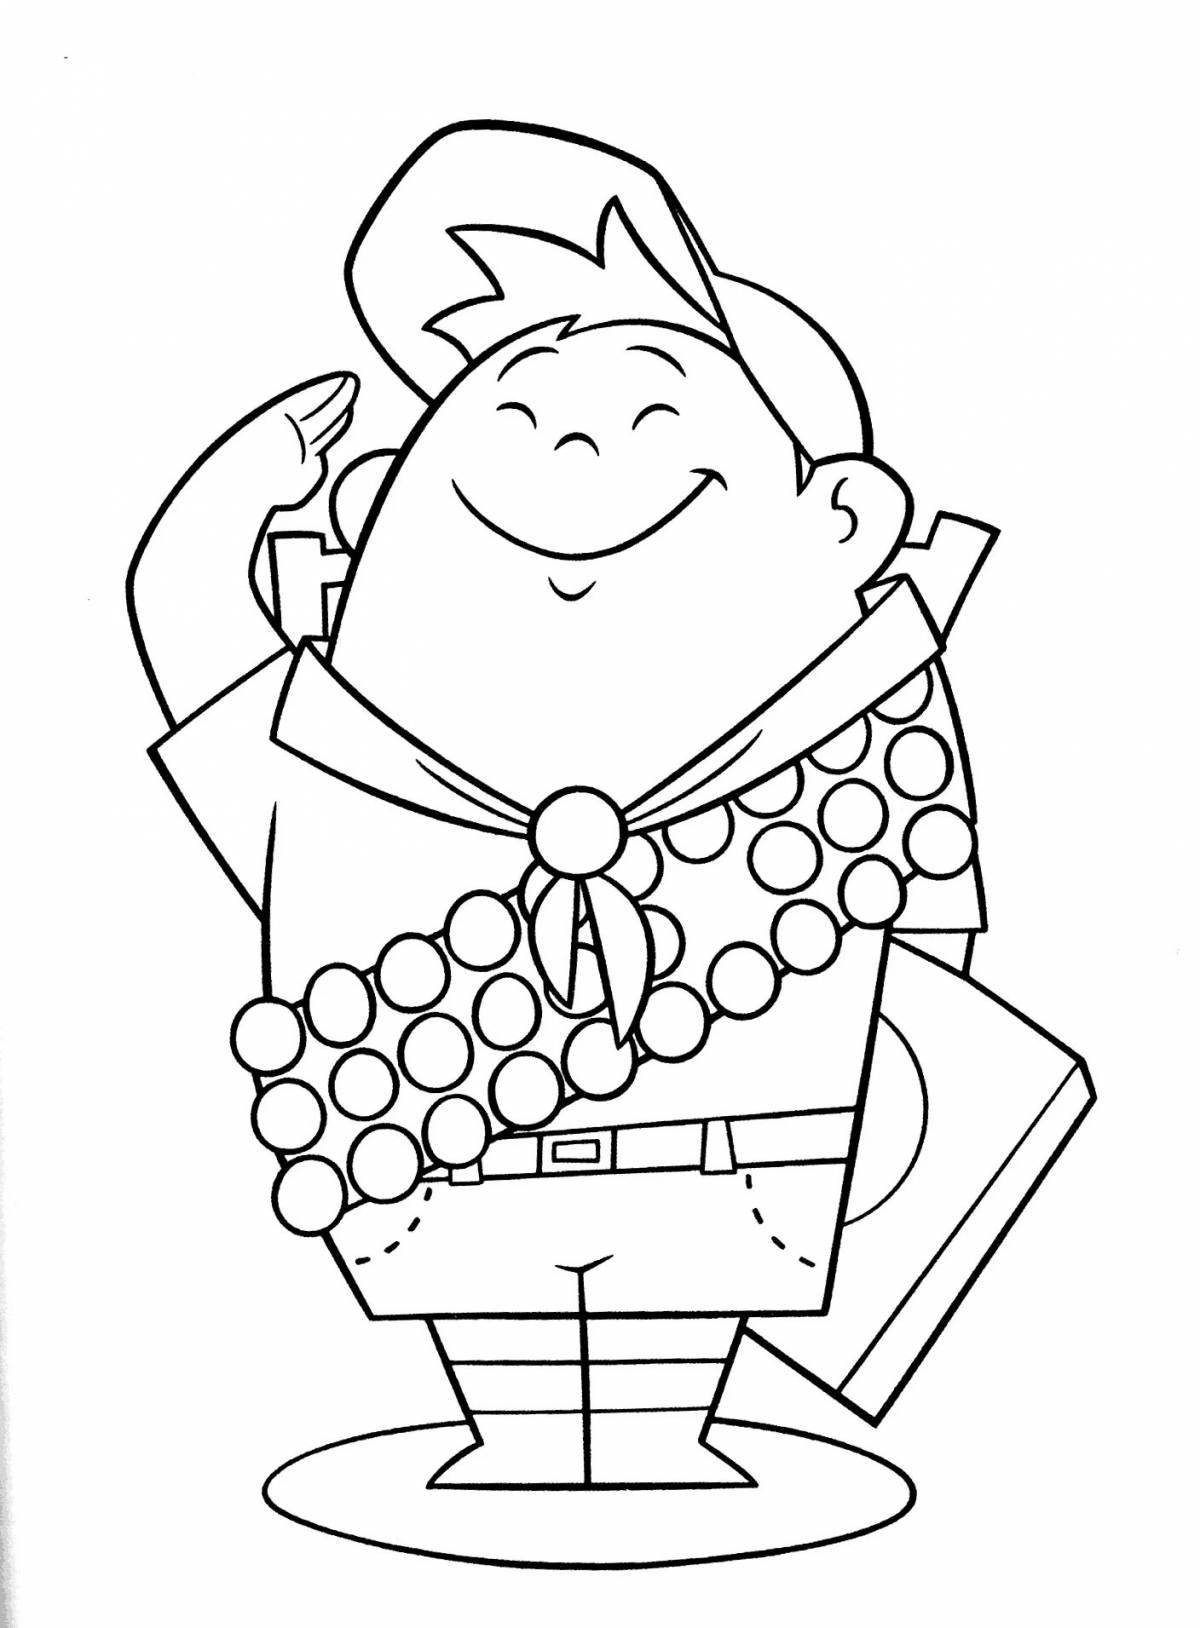 Invitation coloring page up